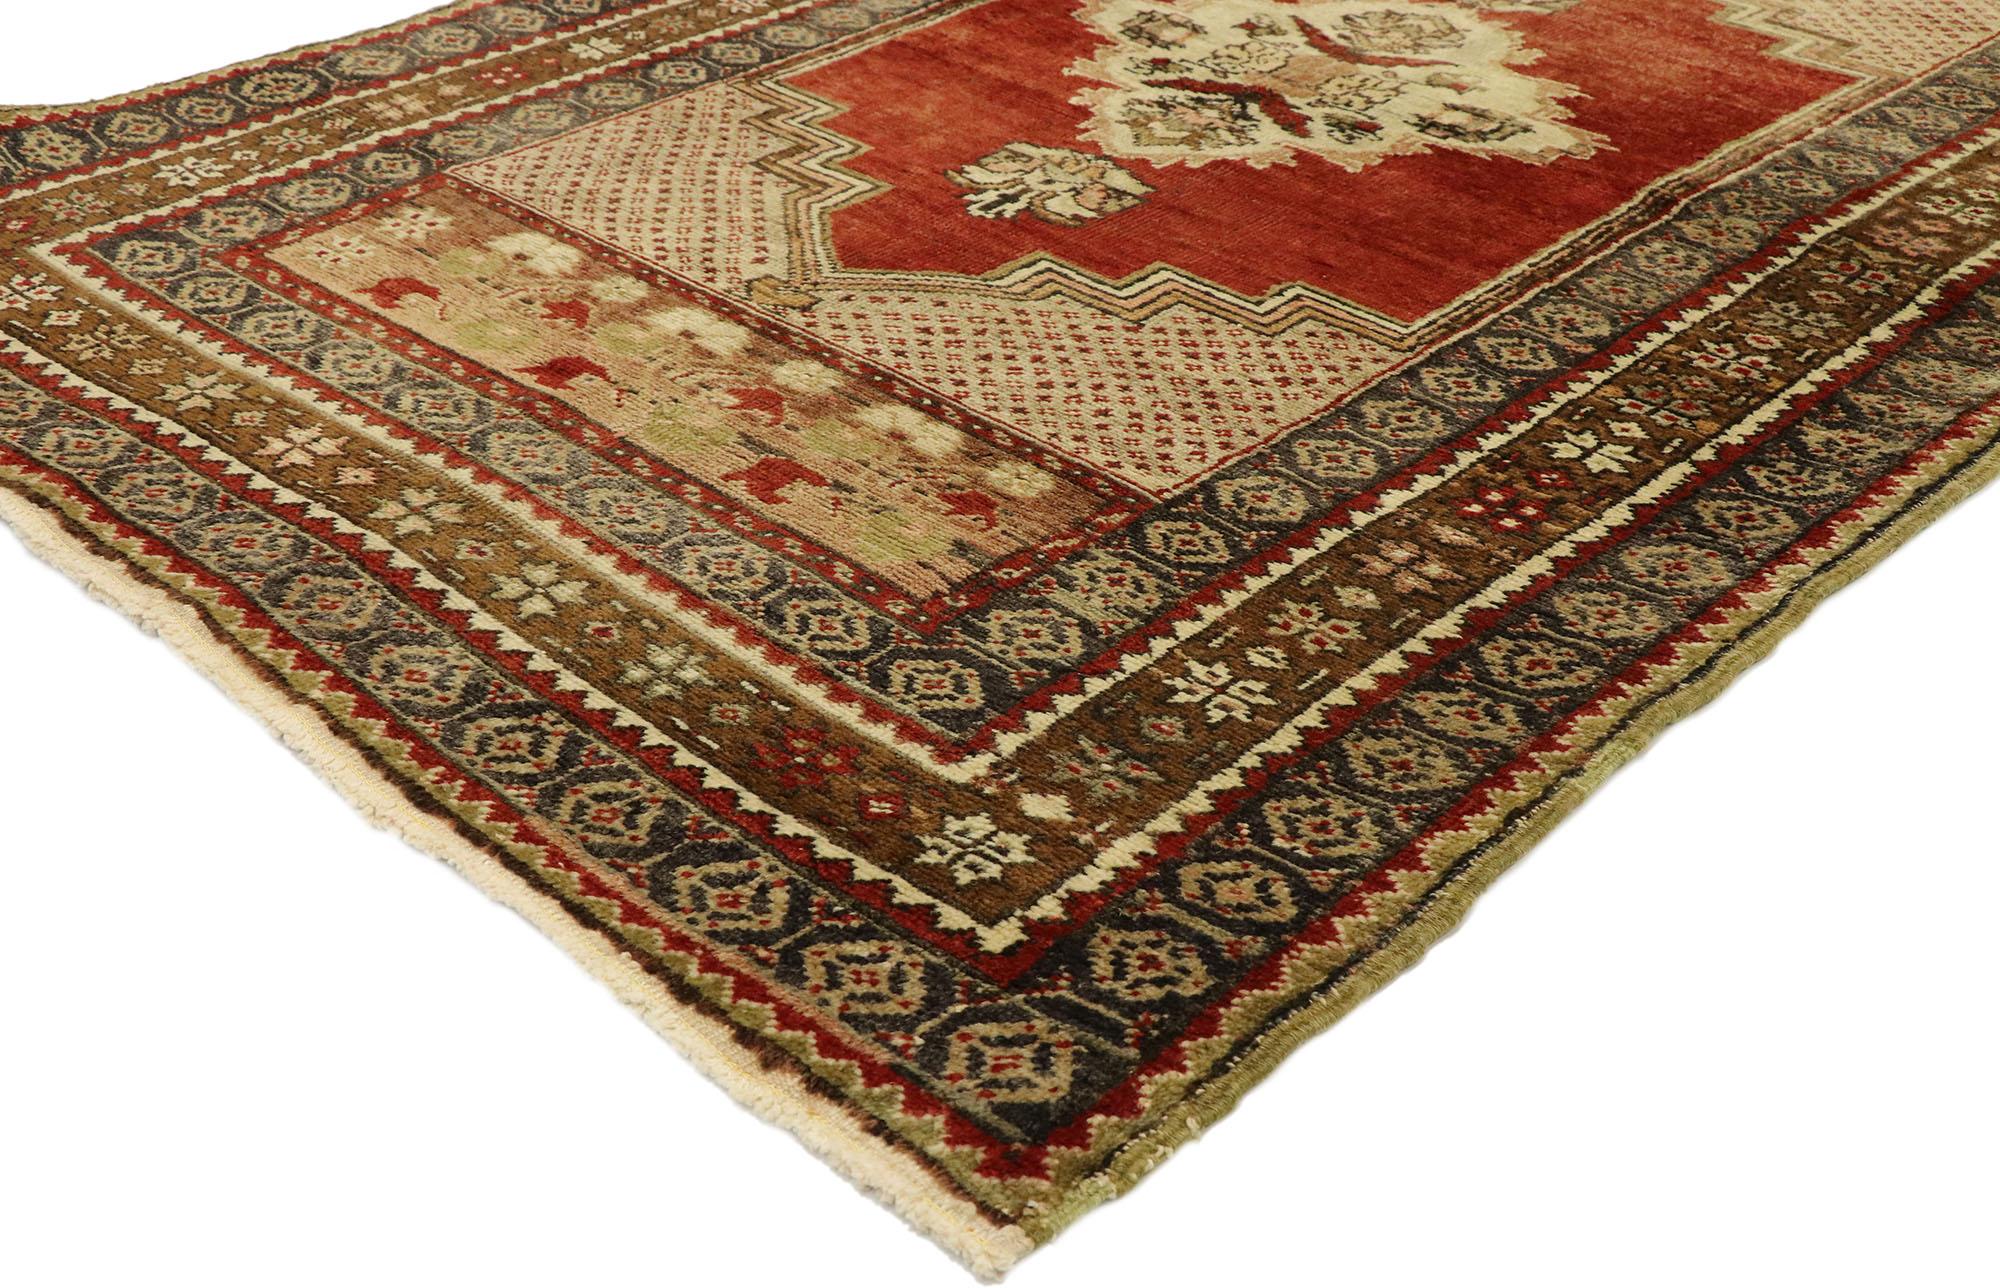 73843 Vintage Turkish Oushak Rug, 03'06 x 05'06. In the realm where enchantment and elegance intertwine, behold this hand-knotted wool vintage Turkish Oushak rug, a carpet woven with threads of magic and dreams. At its heart lies a majestic lozenge